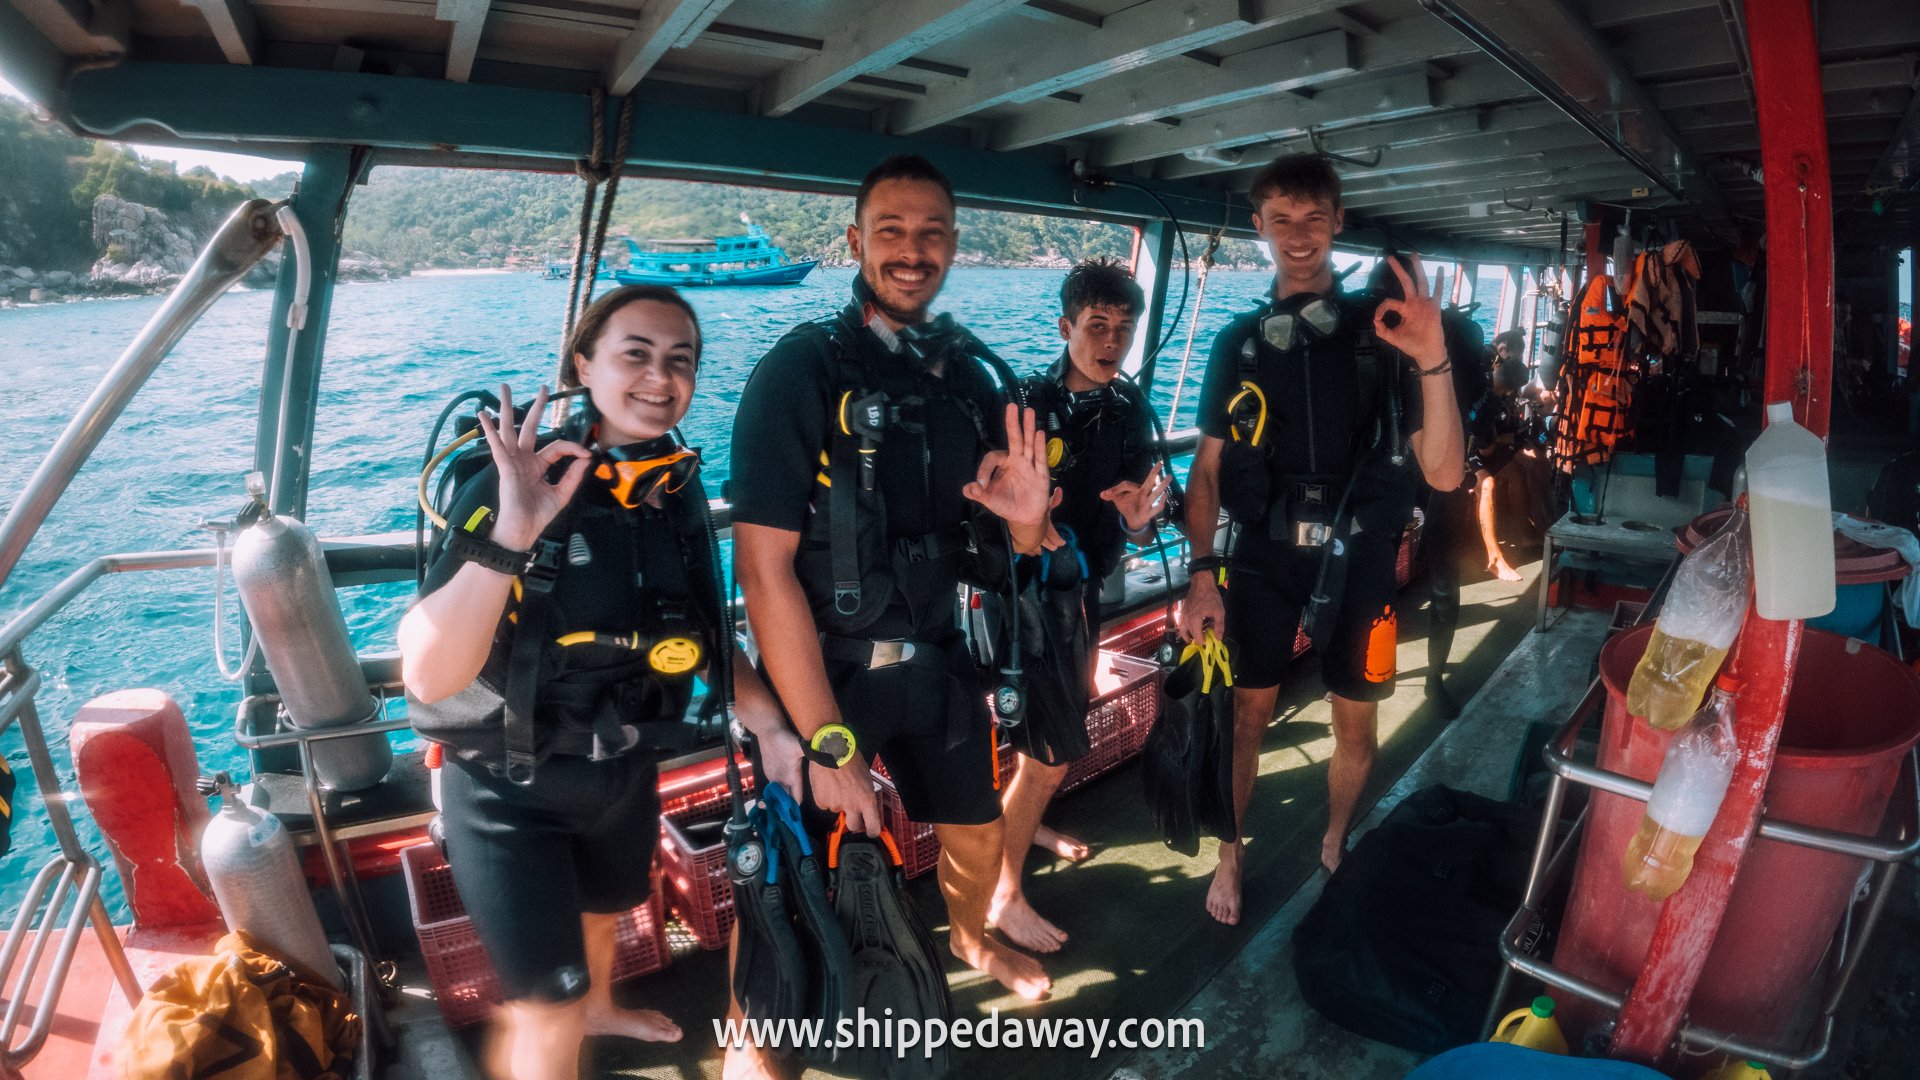 Open Water Scuba Diving Course, Koh Tao, Thailand - in scuba diving gear ready to dive, dive boat